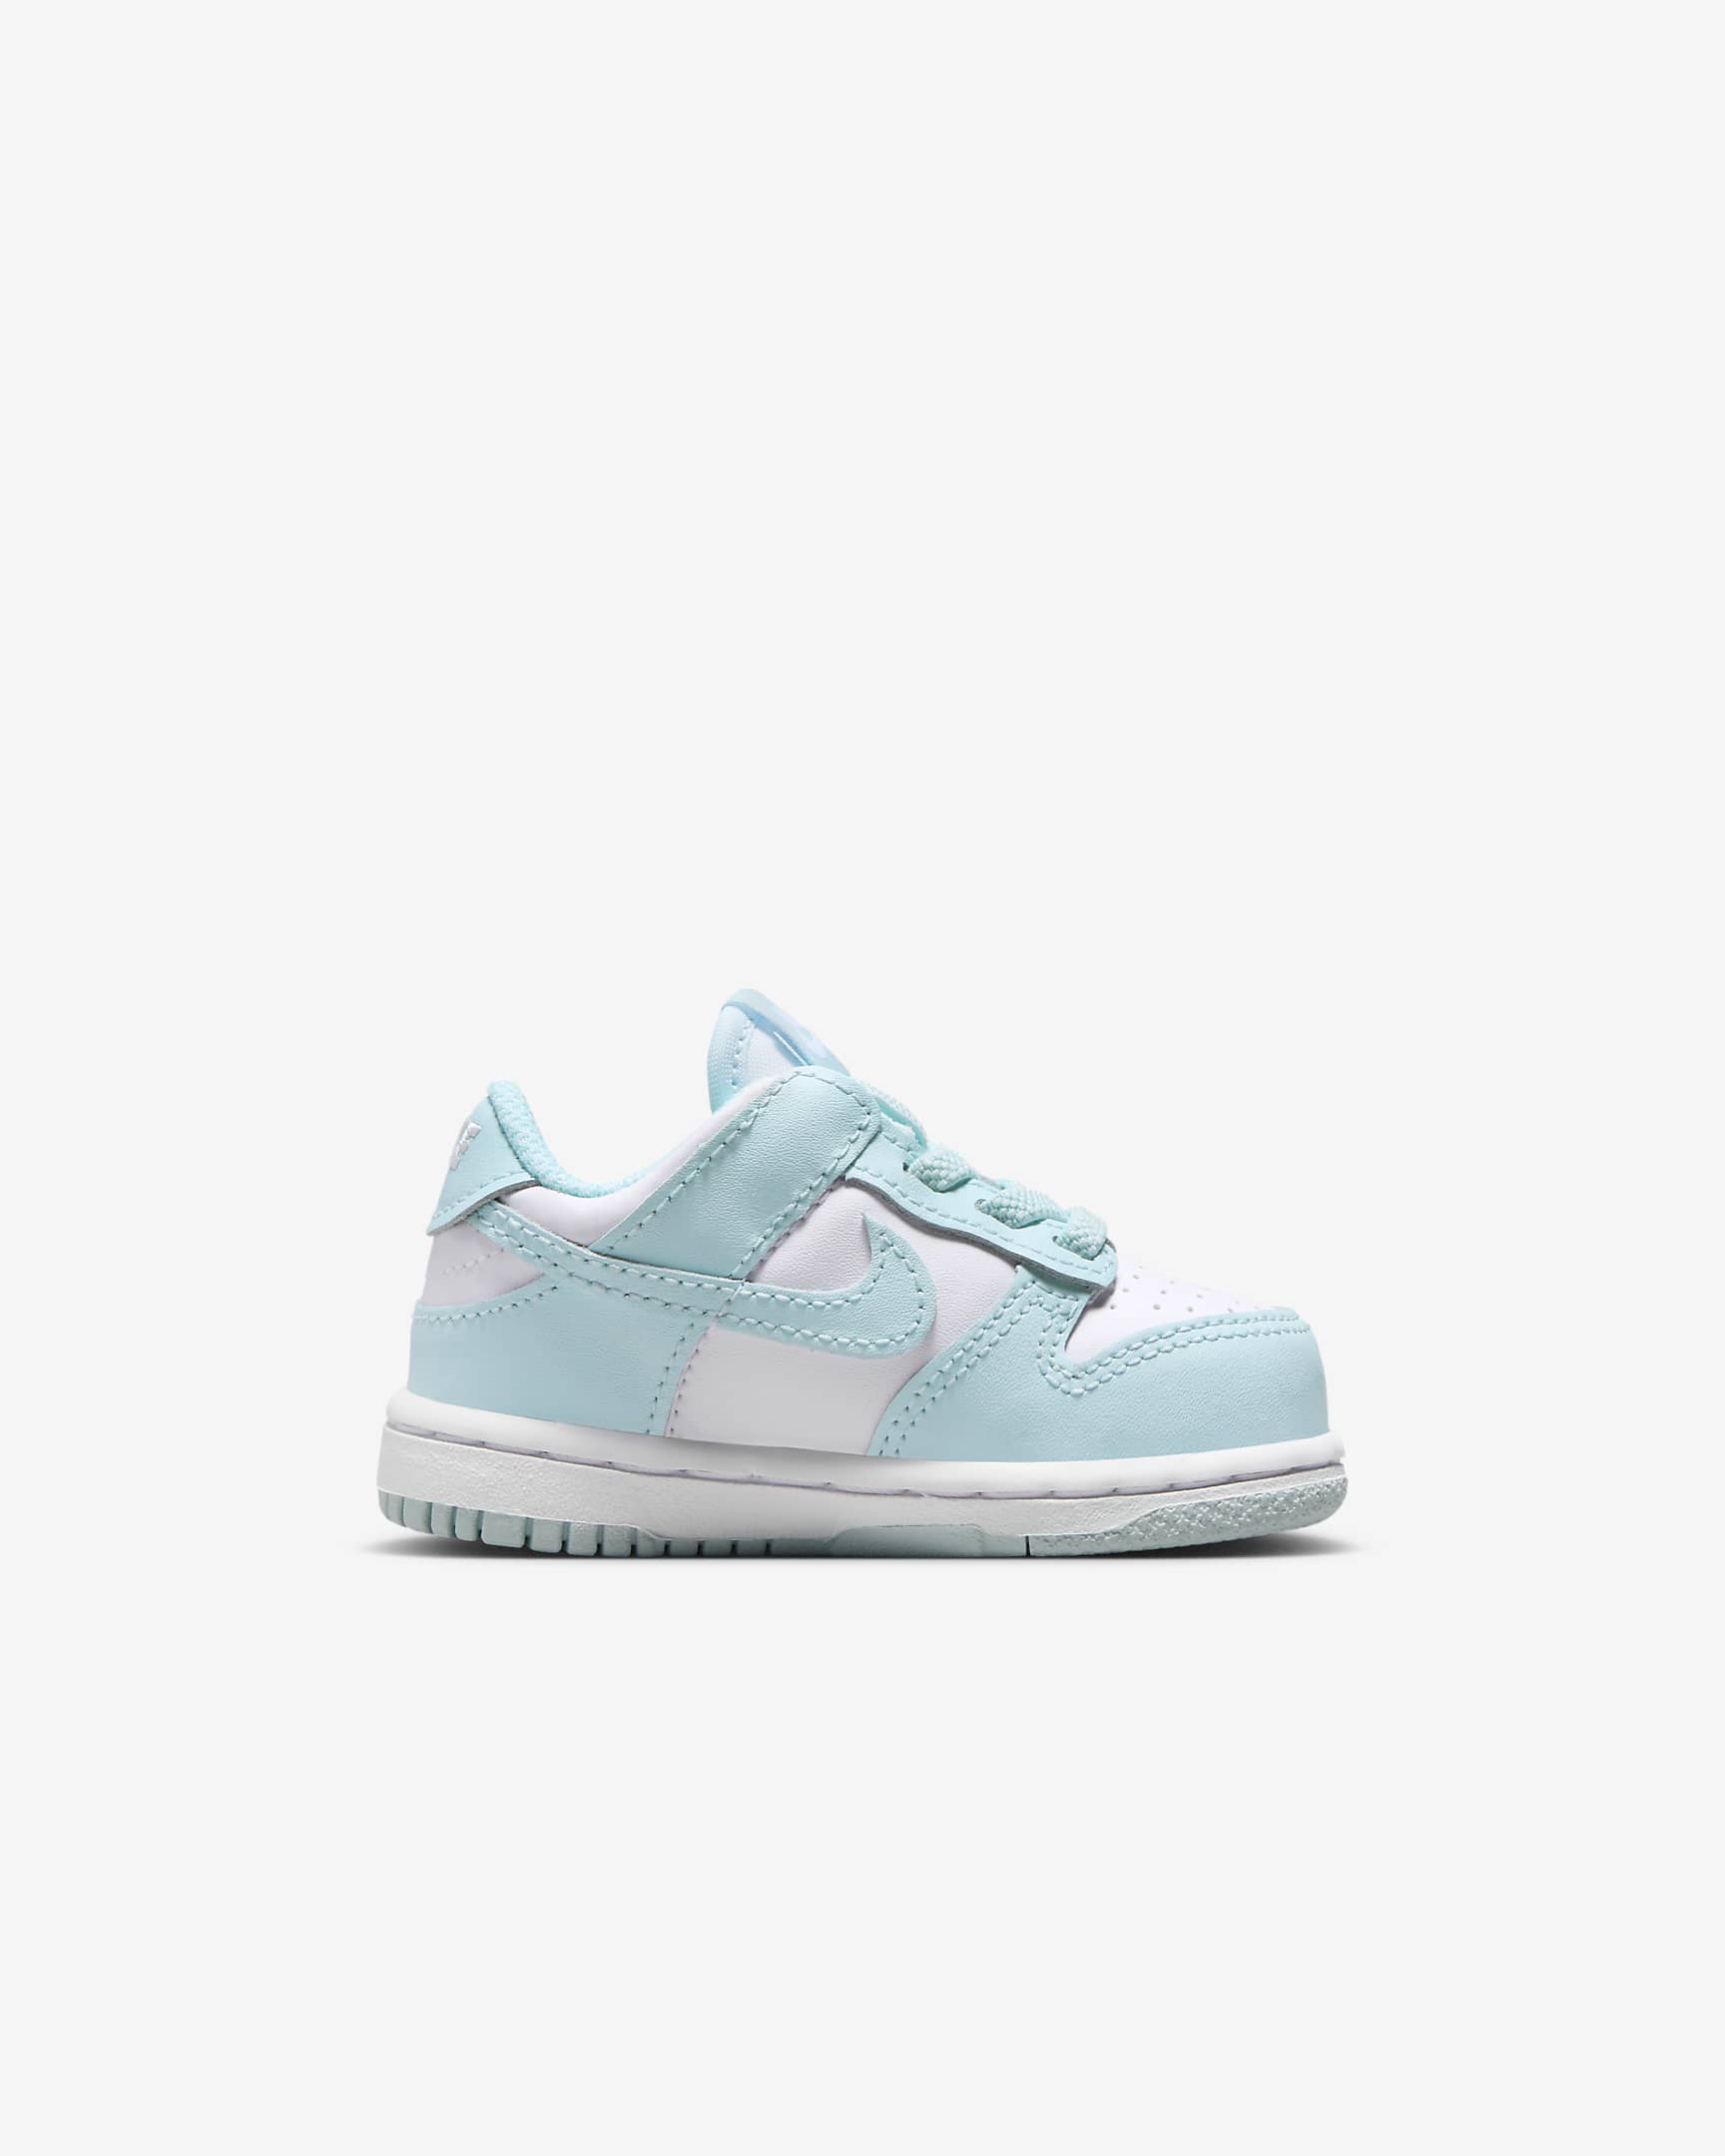 Nike Dunk Low Baby/Toddler Shoes - White/Glacier Blue